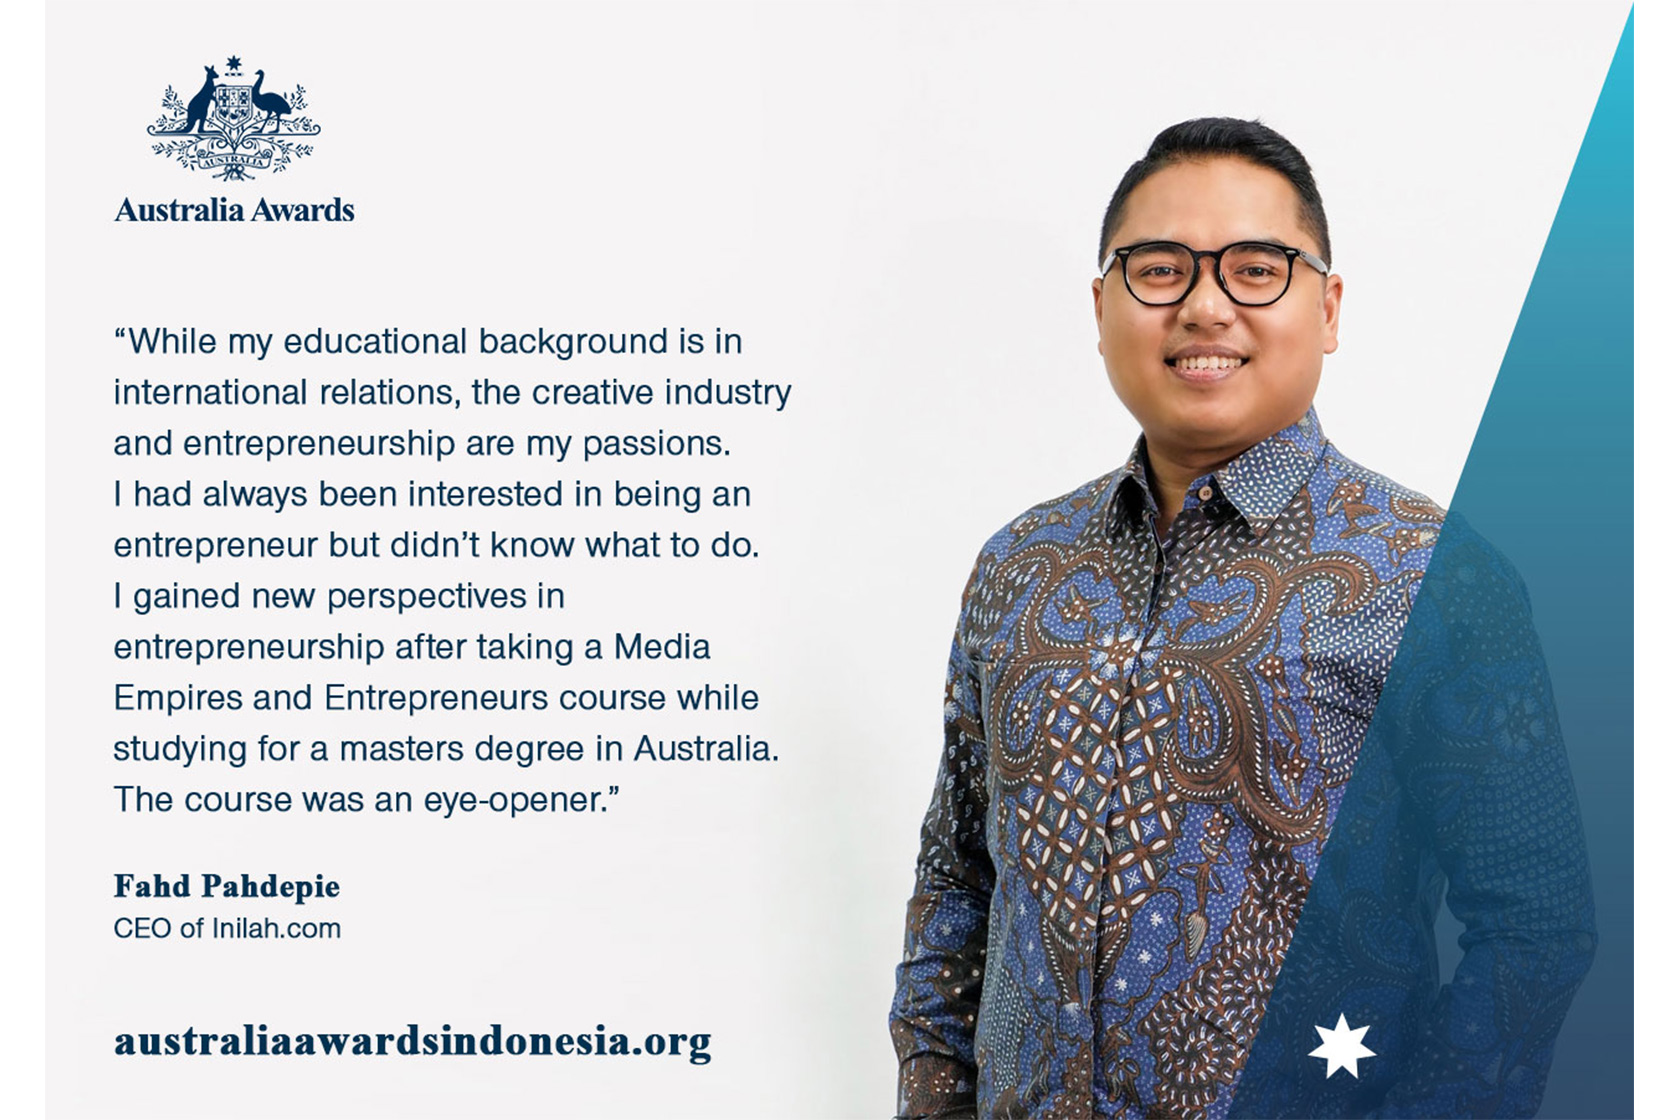 A testimonial from Fahd Pahdepie about his experience studying and living in Australia